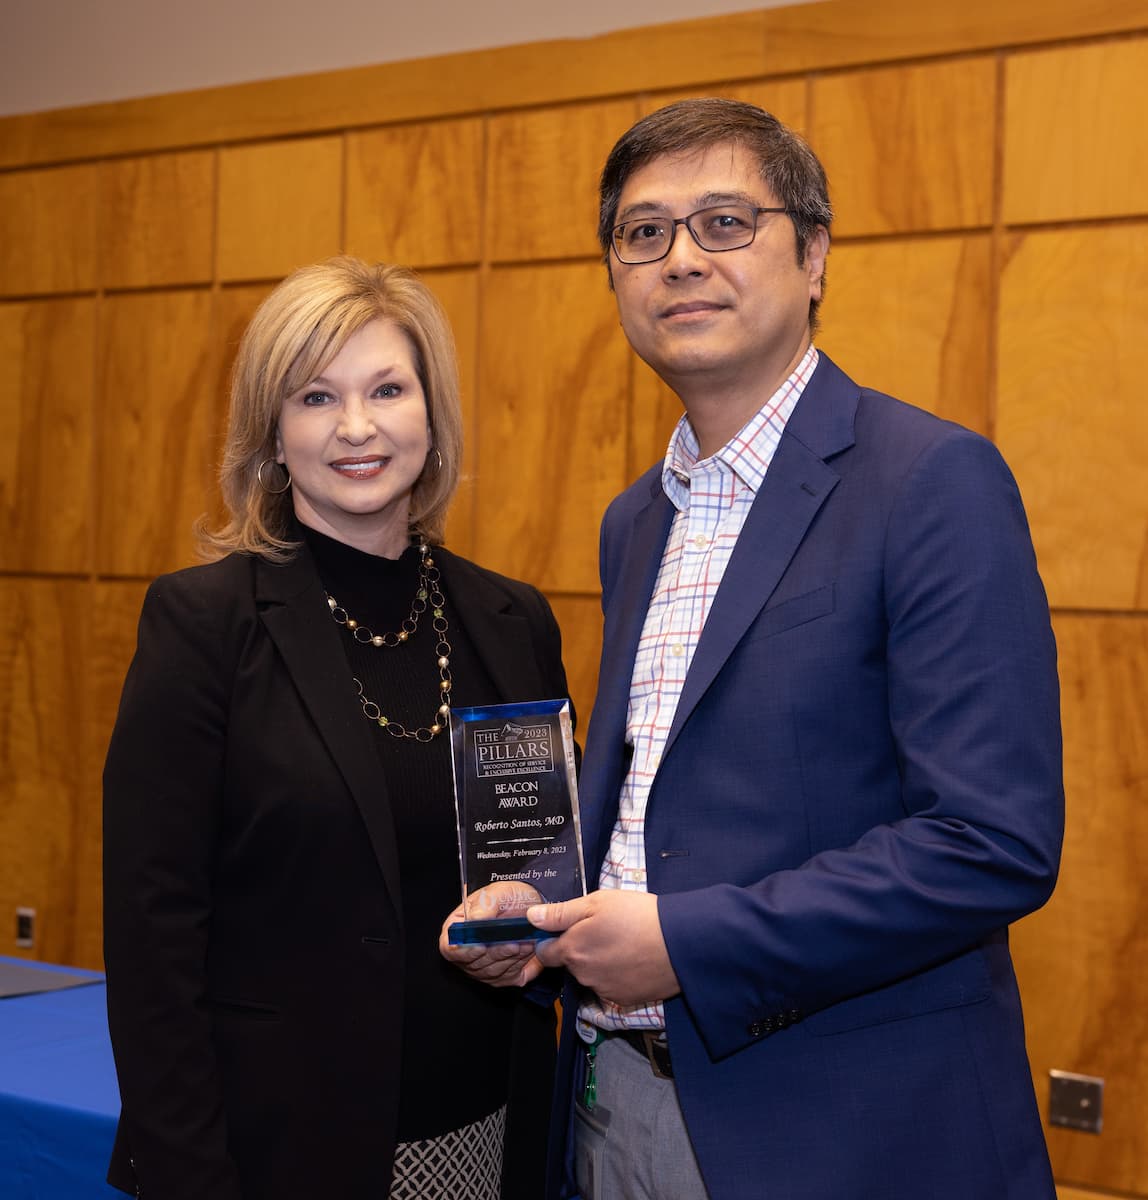 Dr. LouAnn Woodward, vice chancellor for health affairs and dean of the School of Medicine, congratulates Dr. Roberto Santos on winning the Beacon Award.